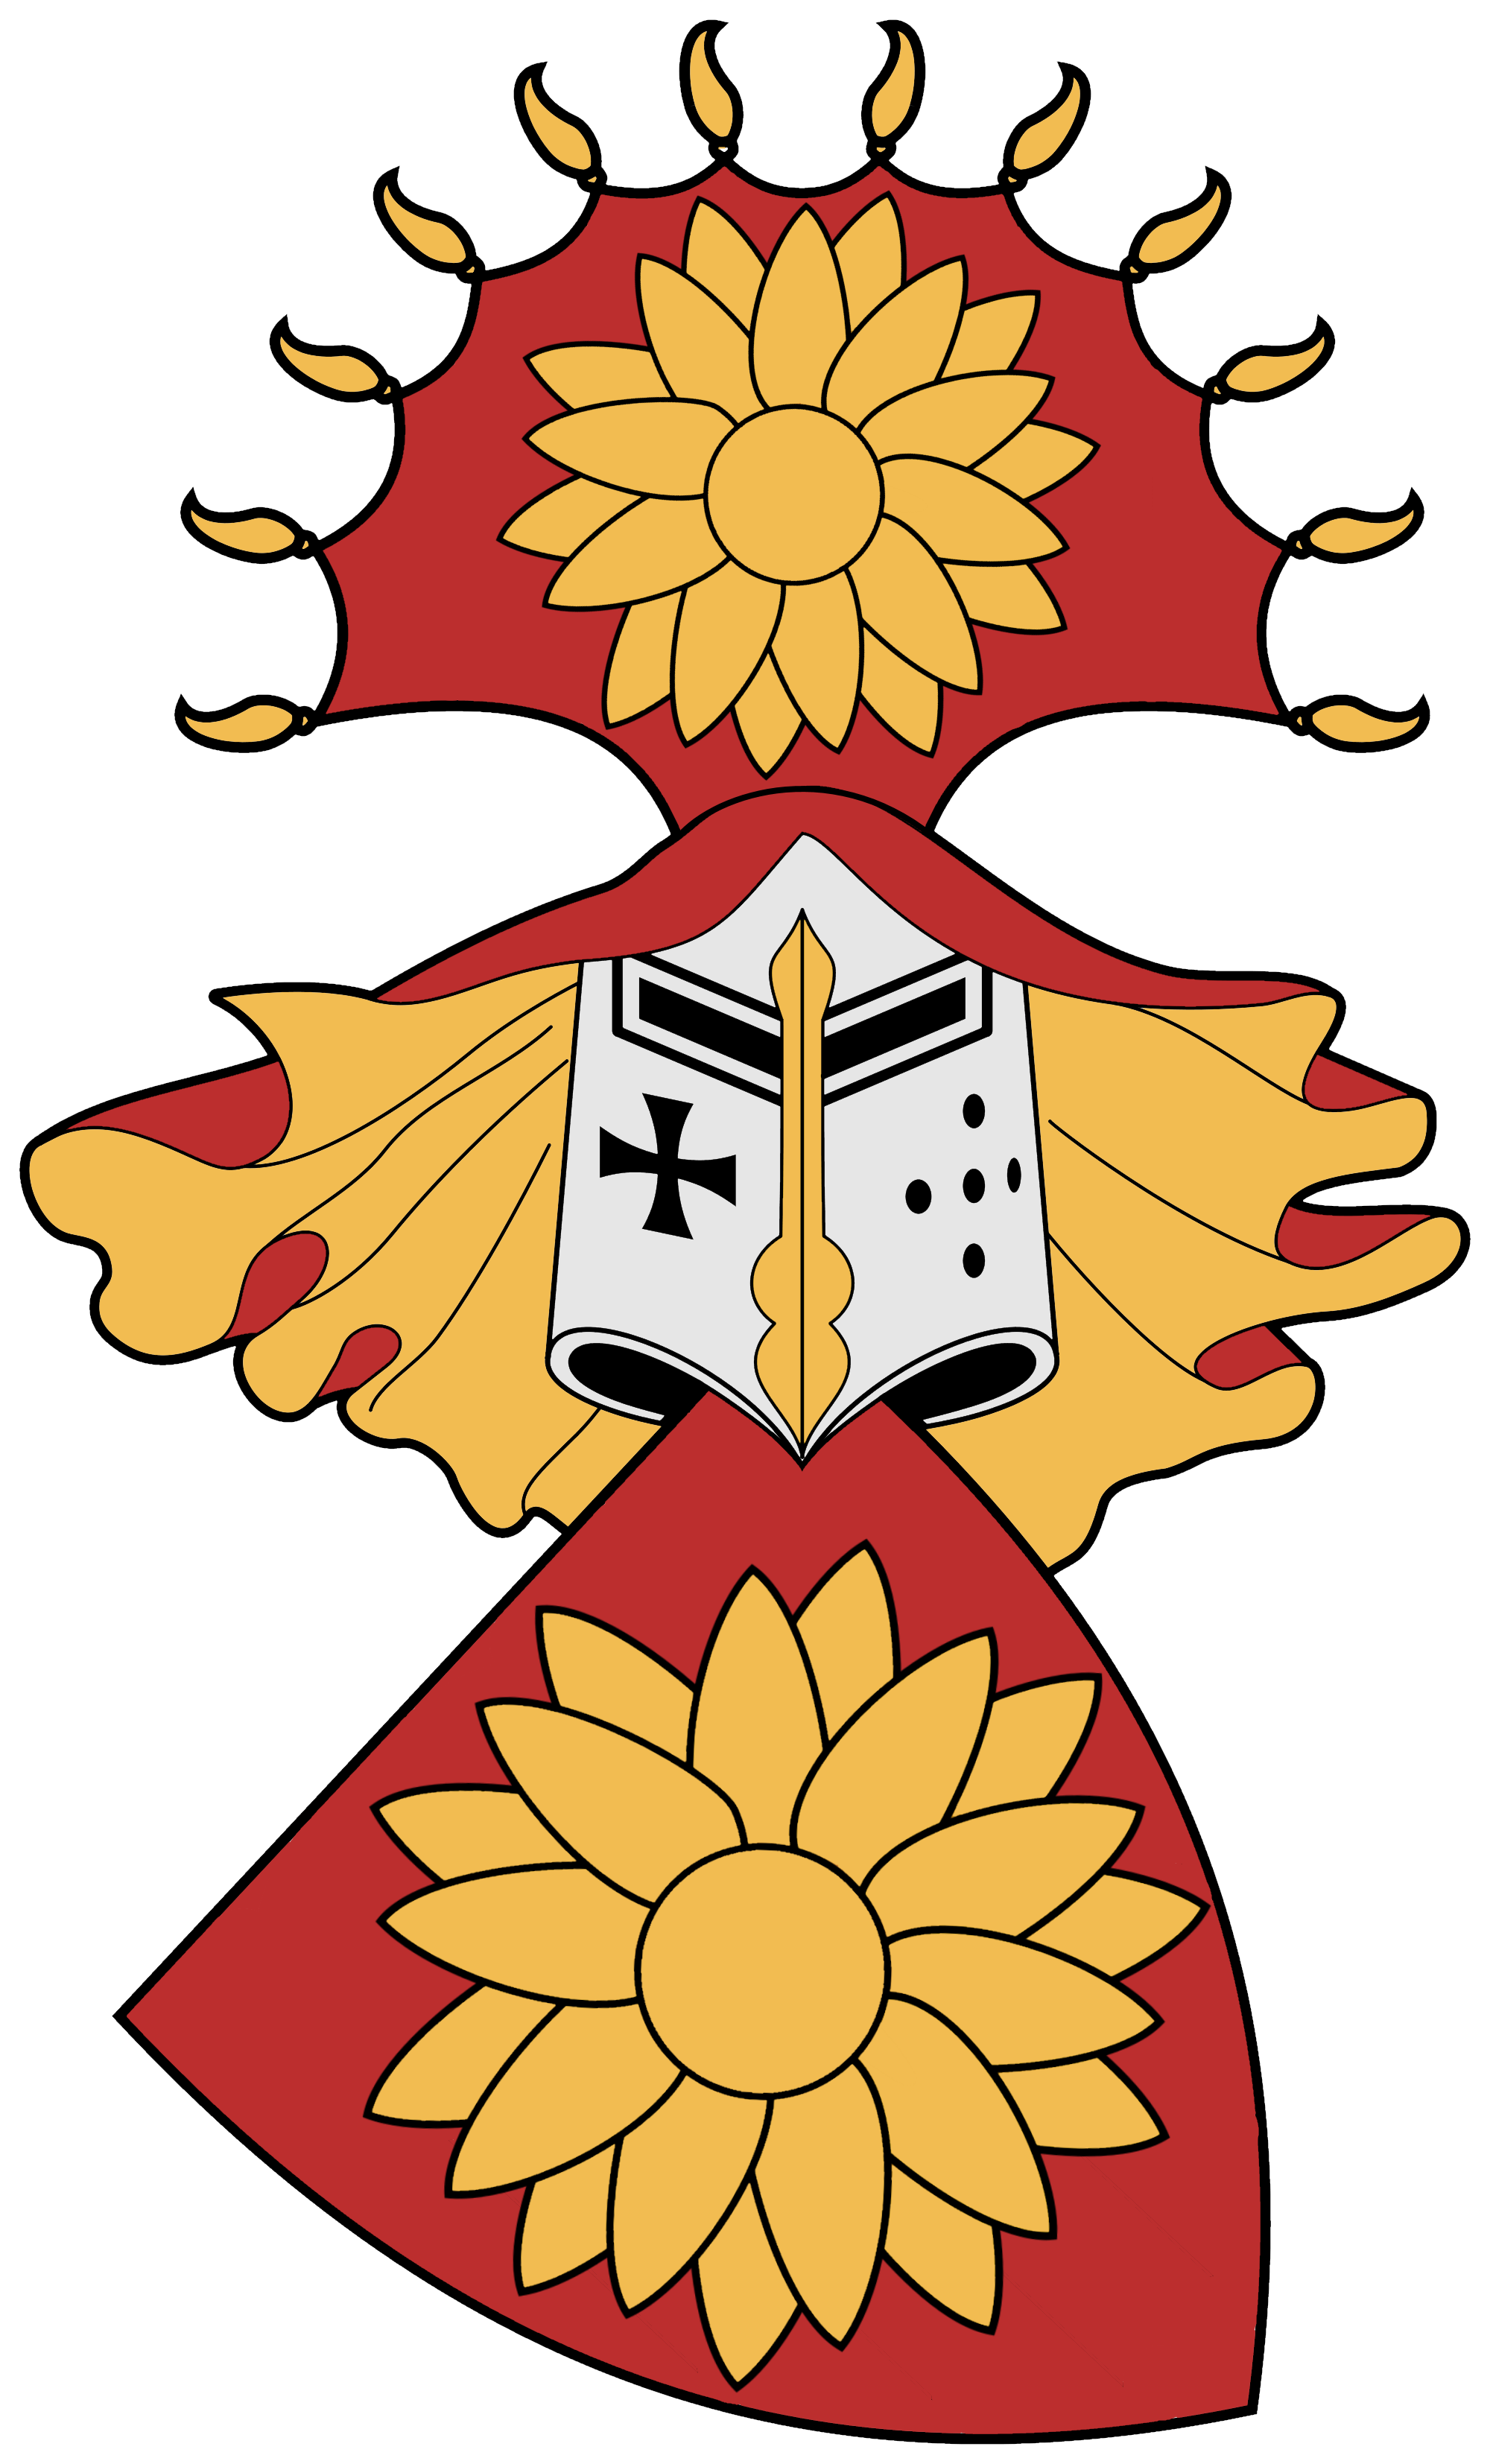 Western style arms of. Japan clipart japan emperor